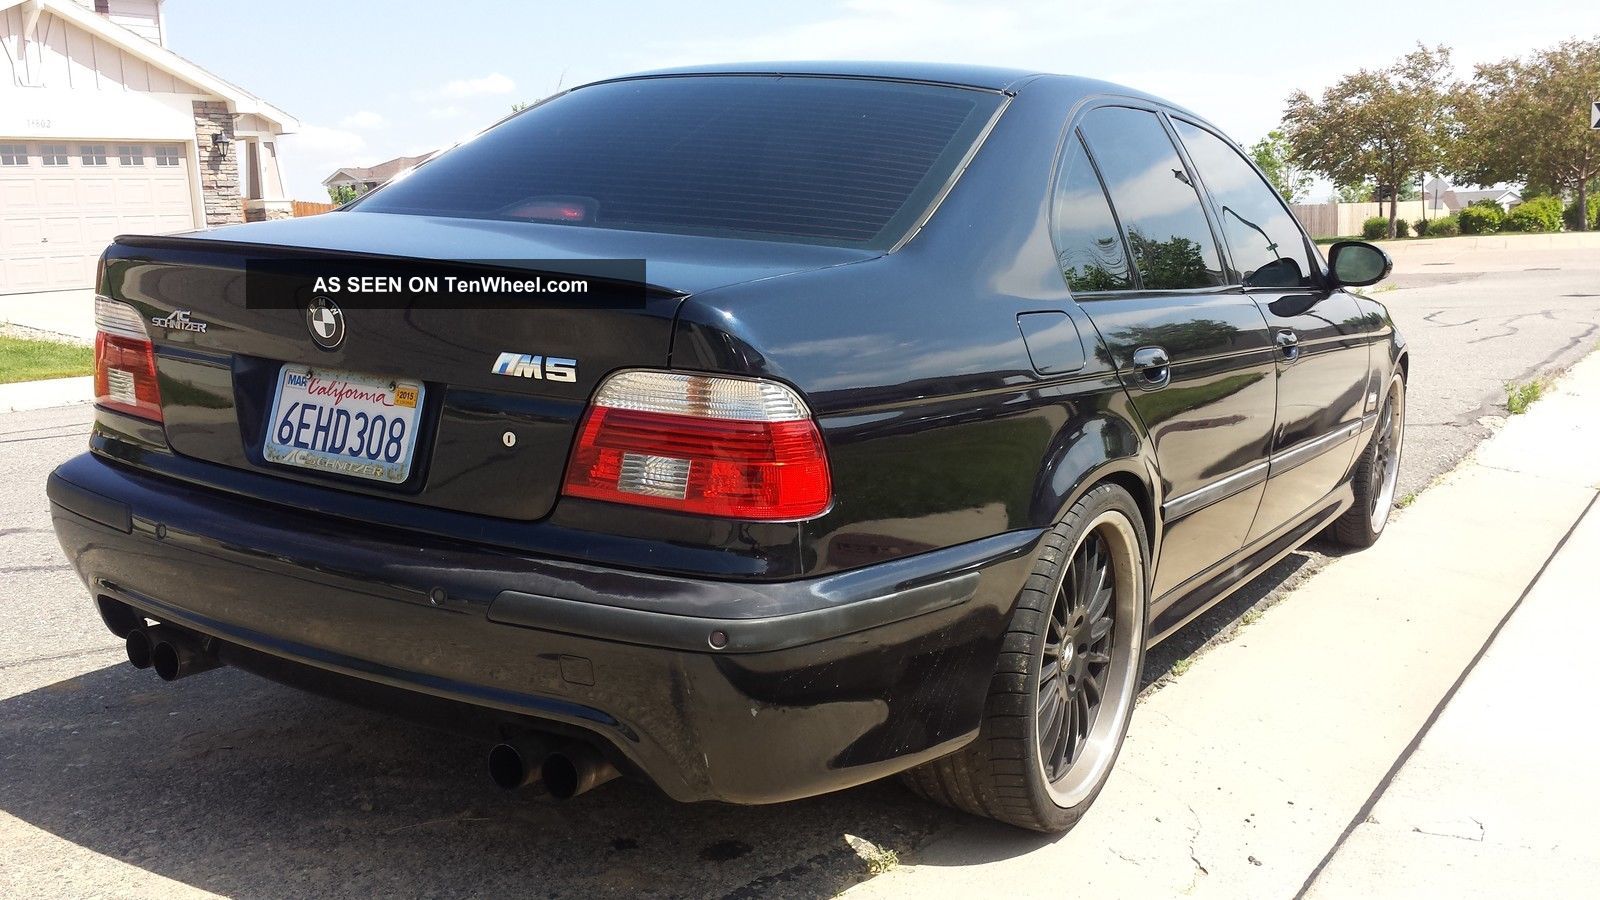 Bmw m5 issues #4